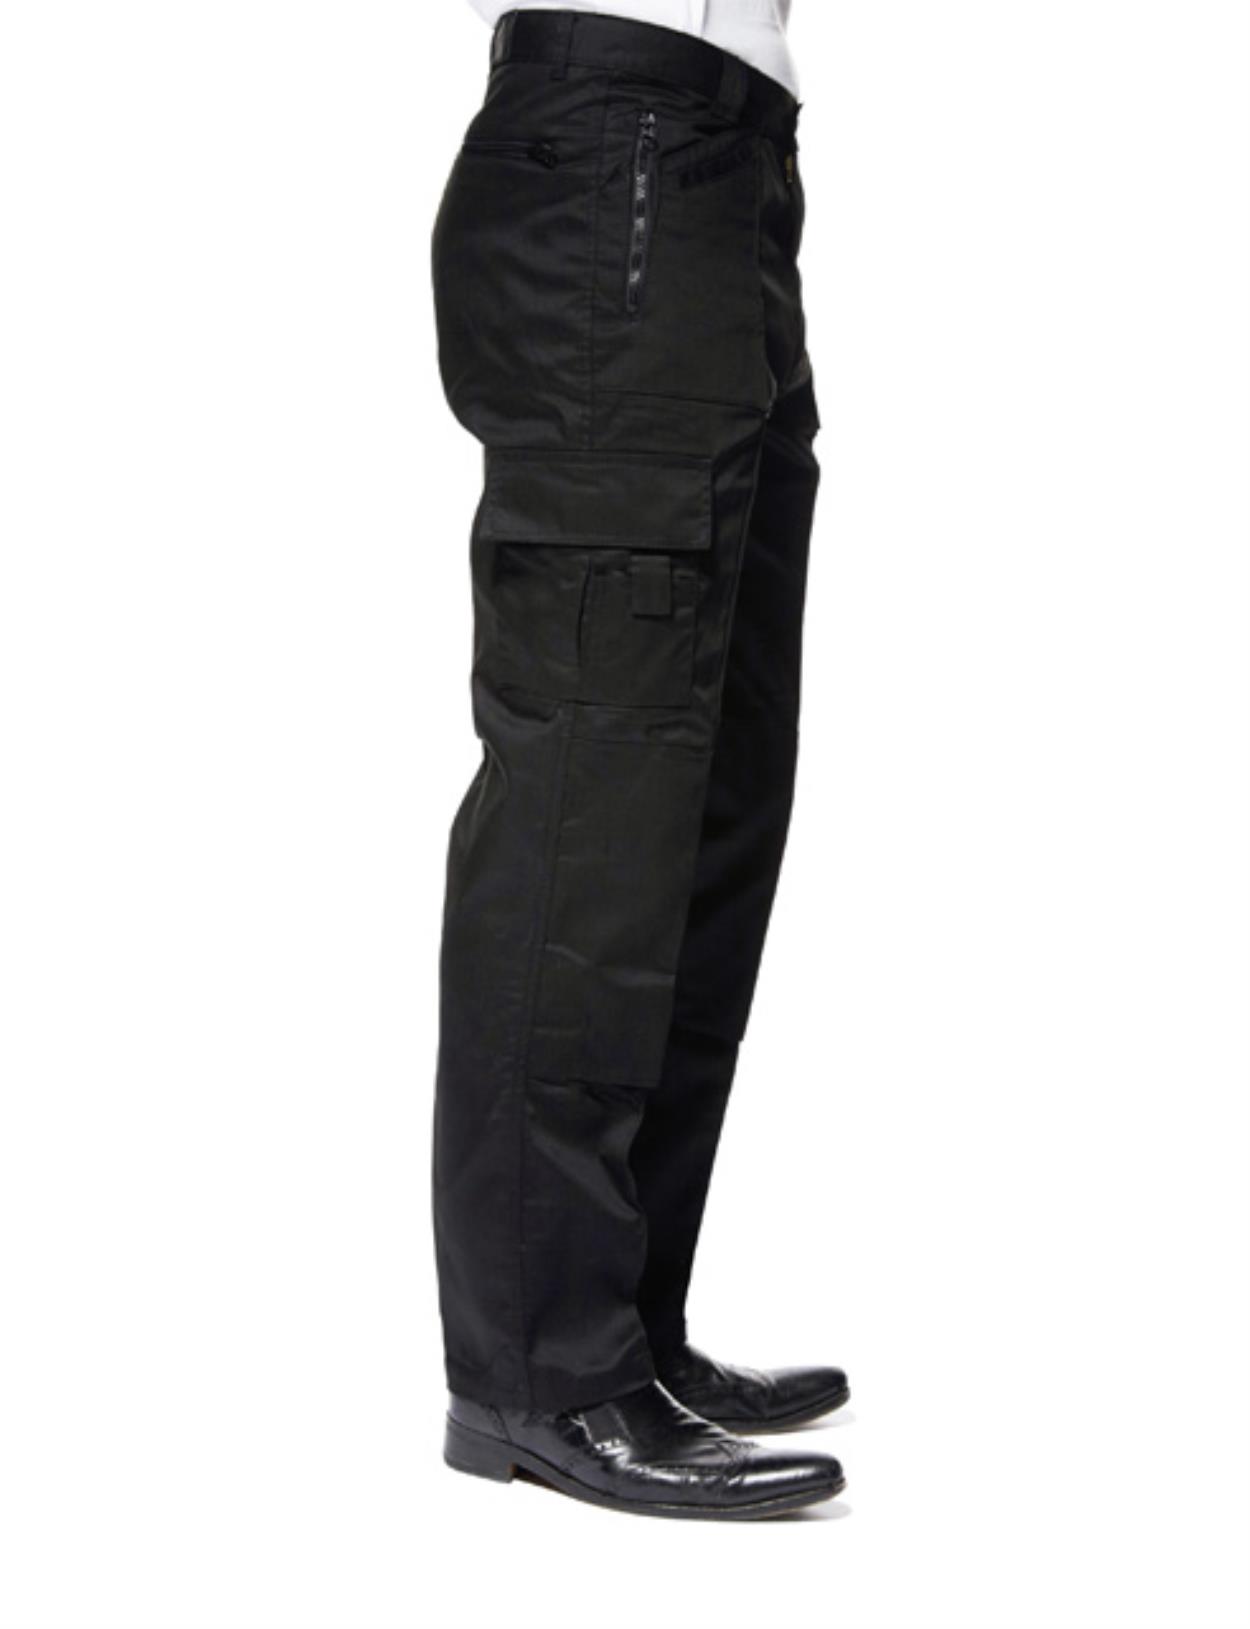 UC903 Action Trouser Image 1